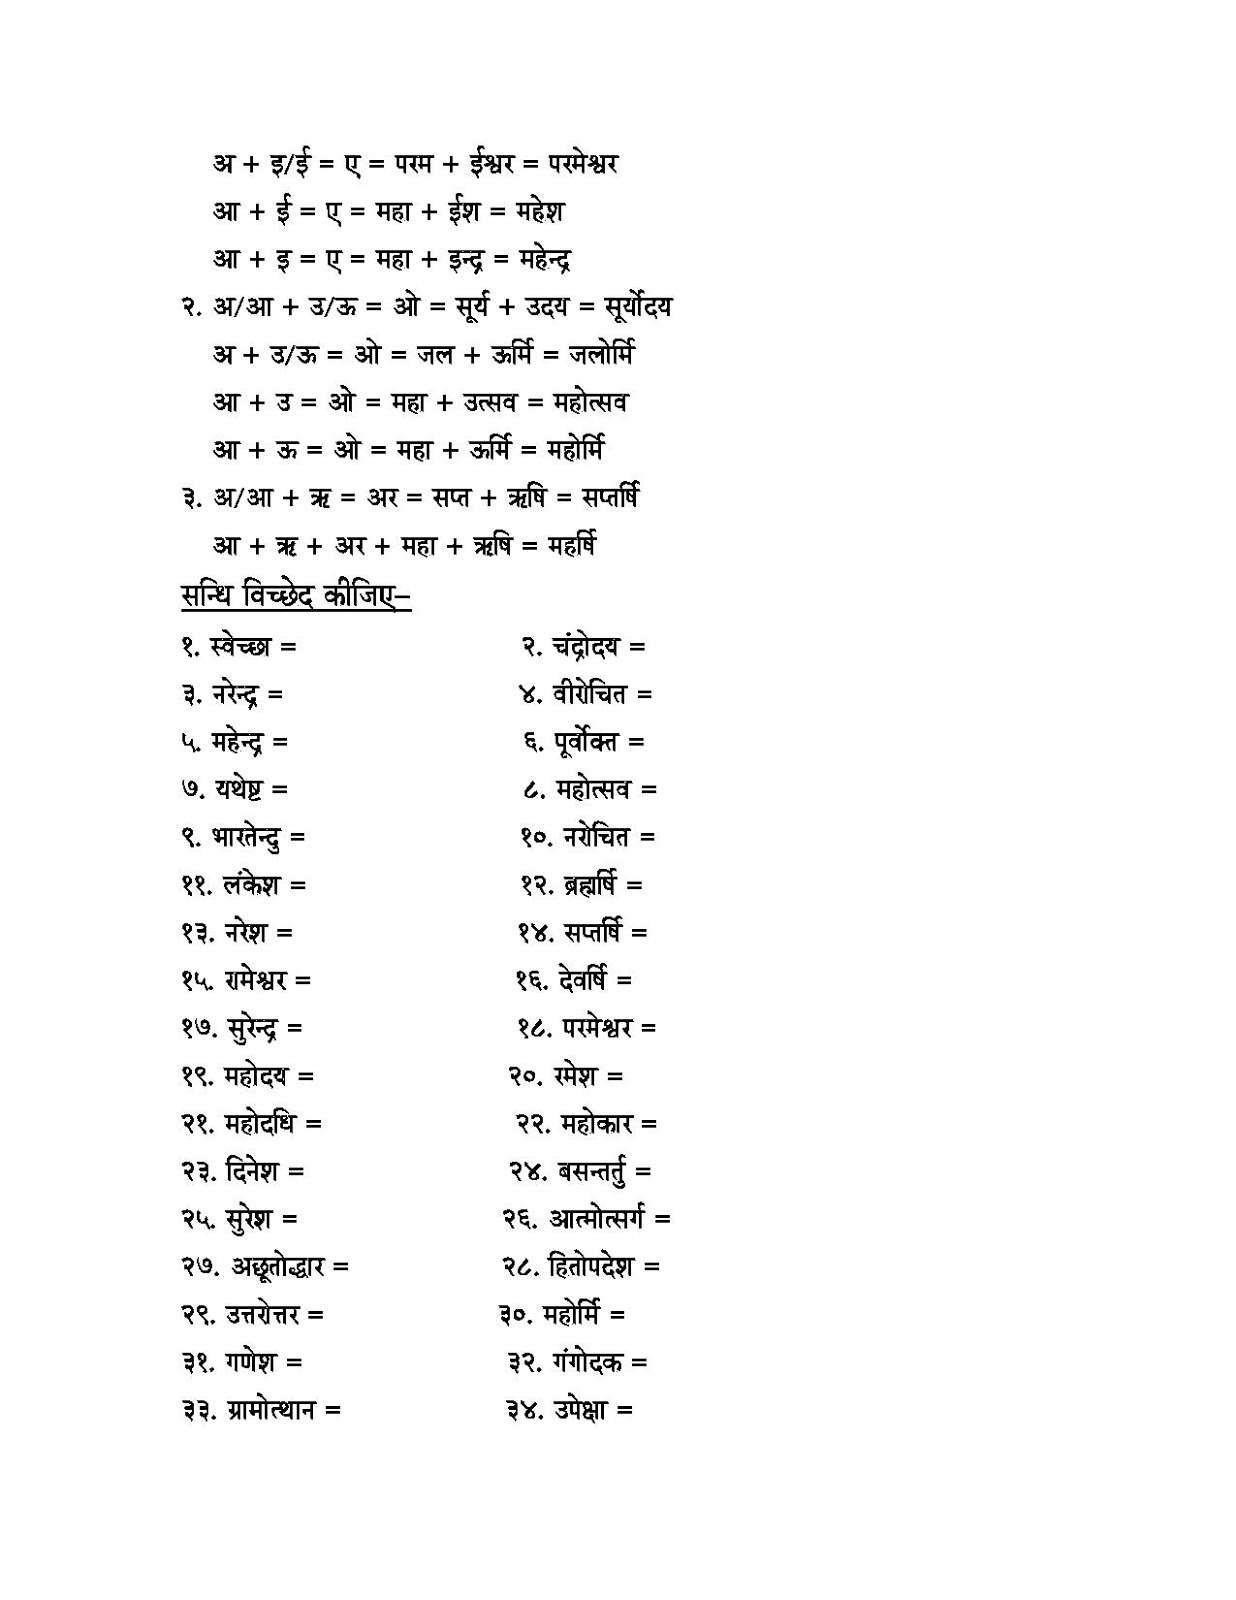 hindi grammar work sheet collection for classes 56 7 8